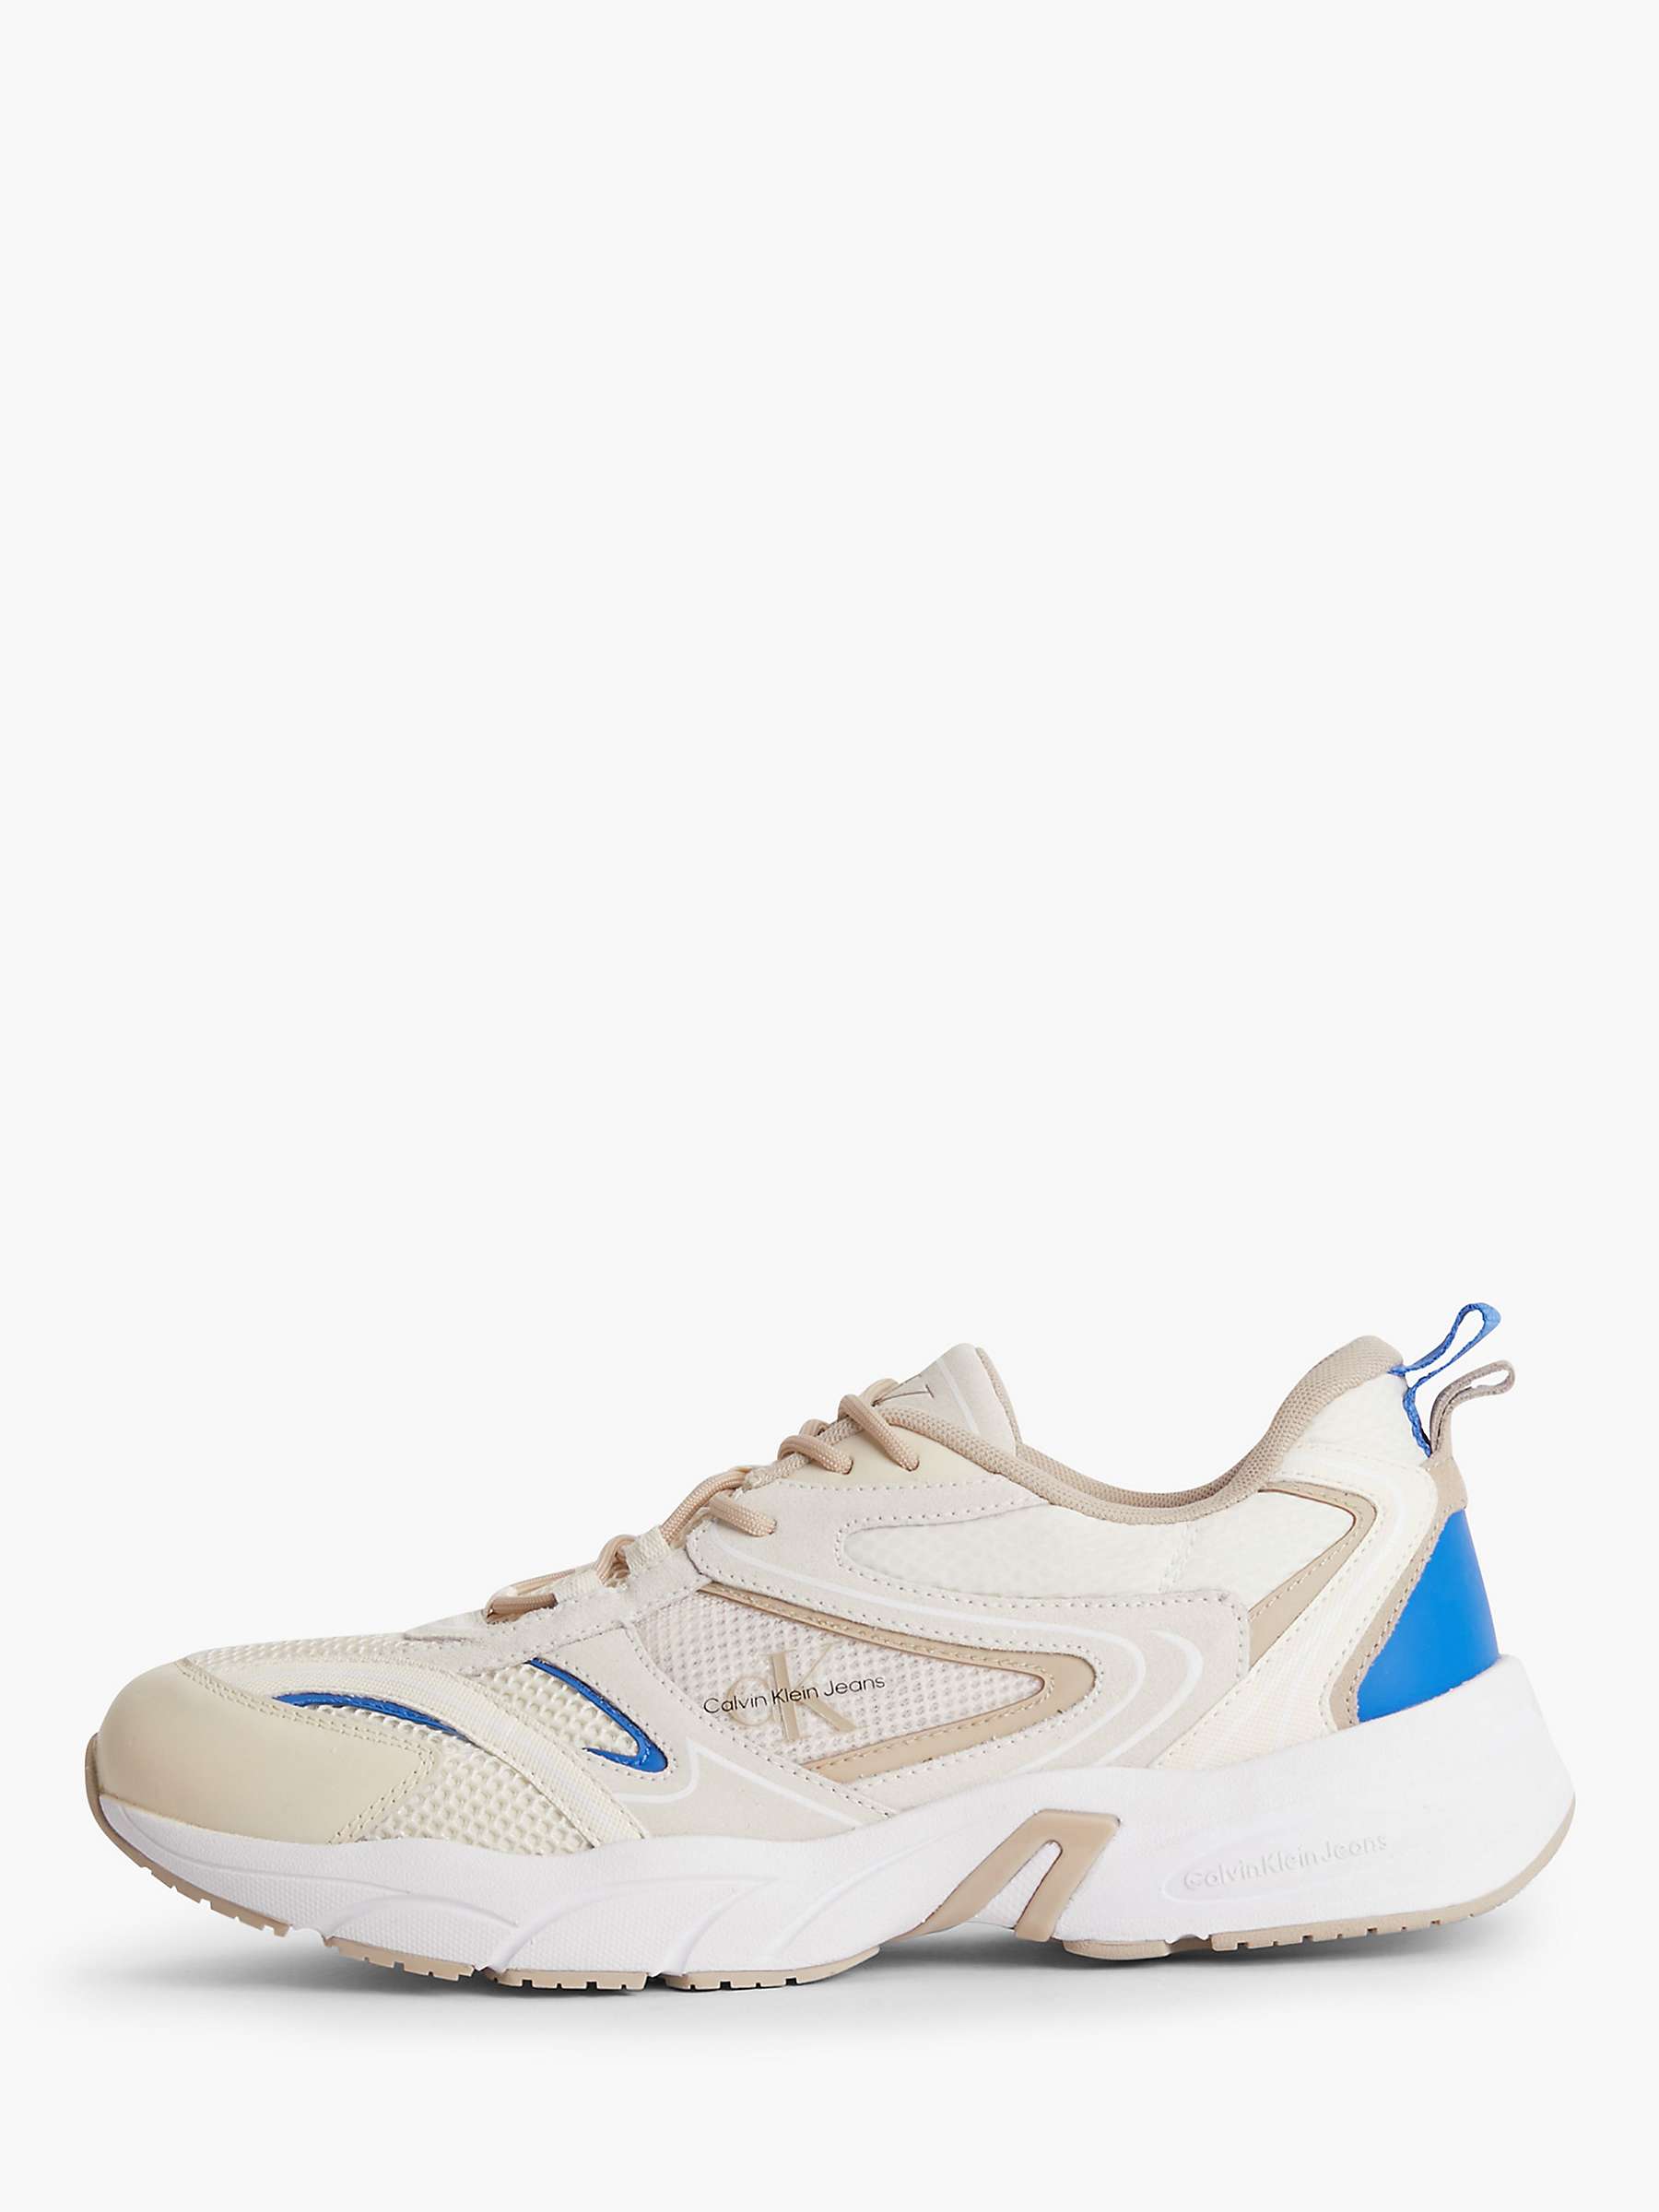 Buy Calvin Klein Leather Lace Up Tennis Trainers, Creamy White/Merino Online at johnlewis.com